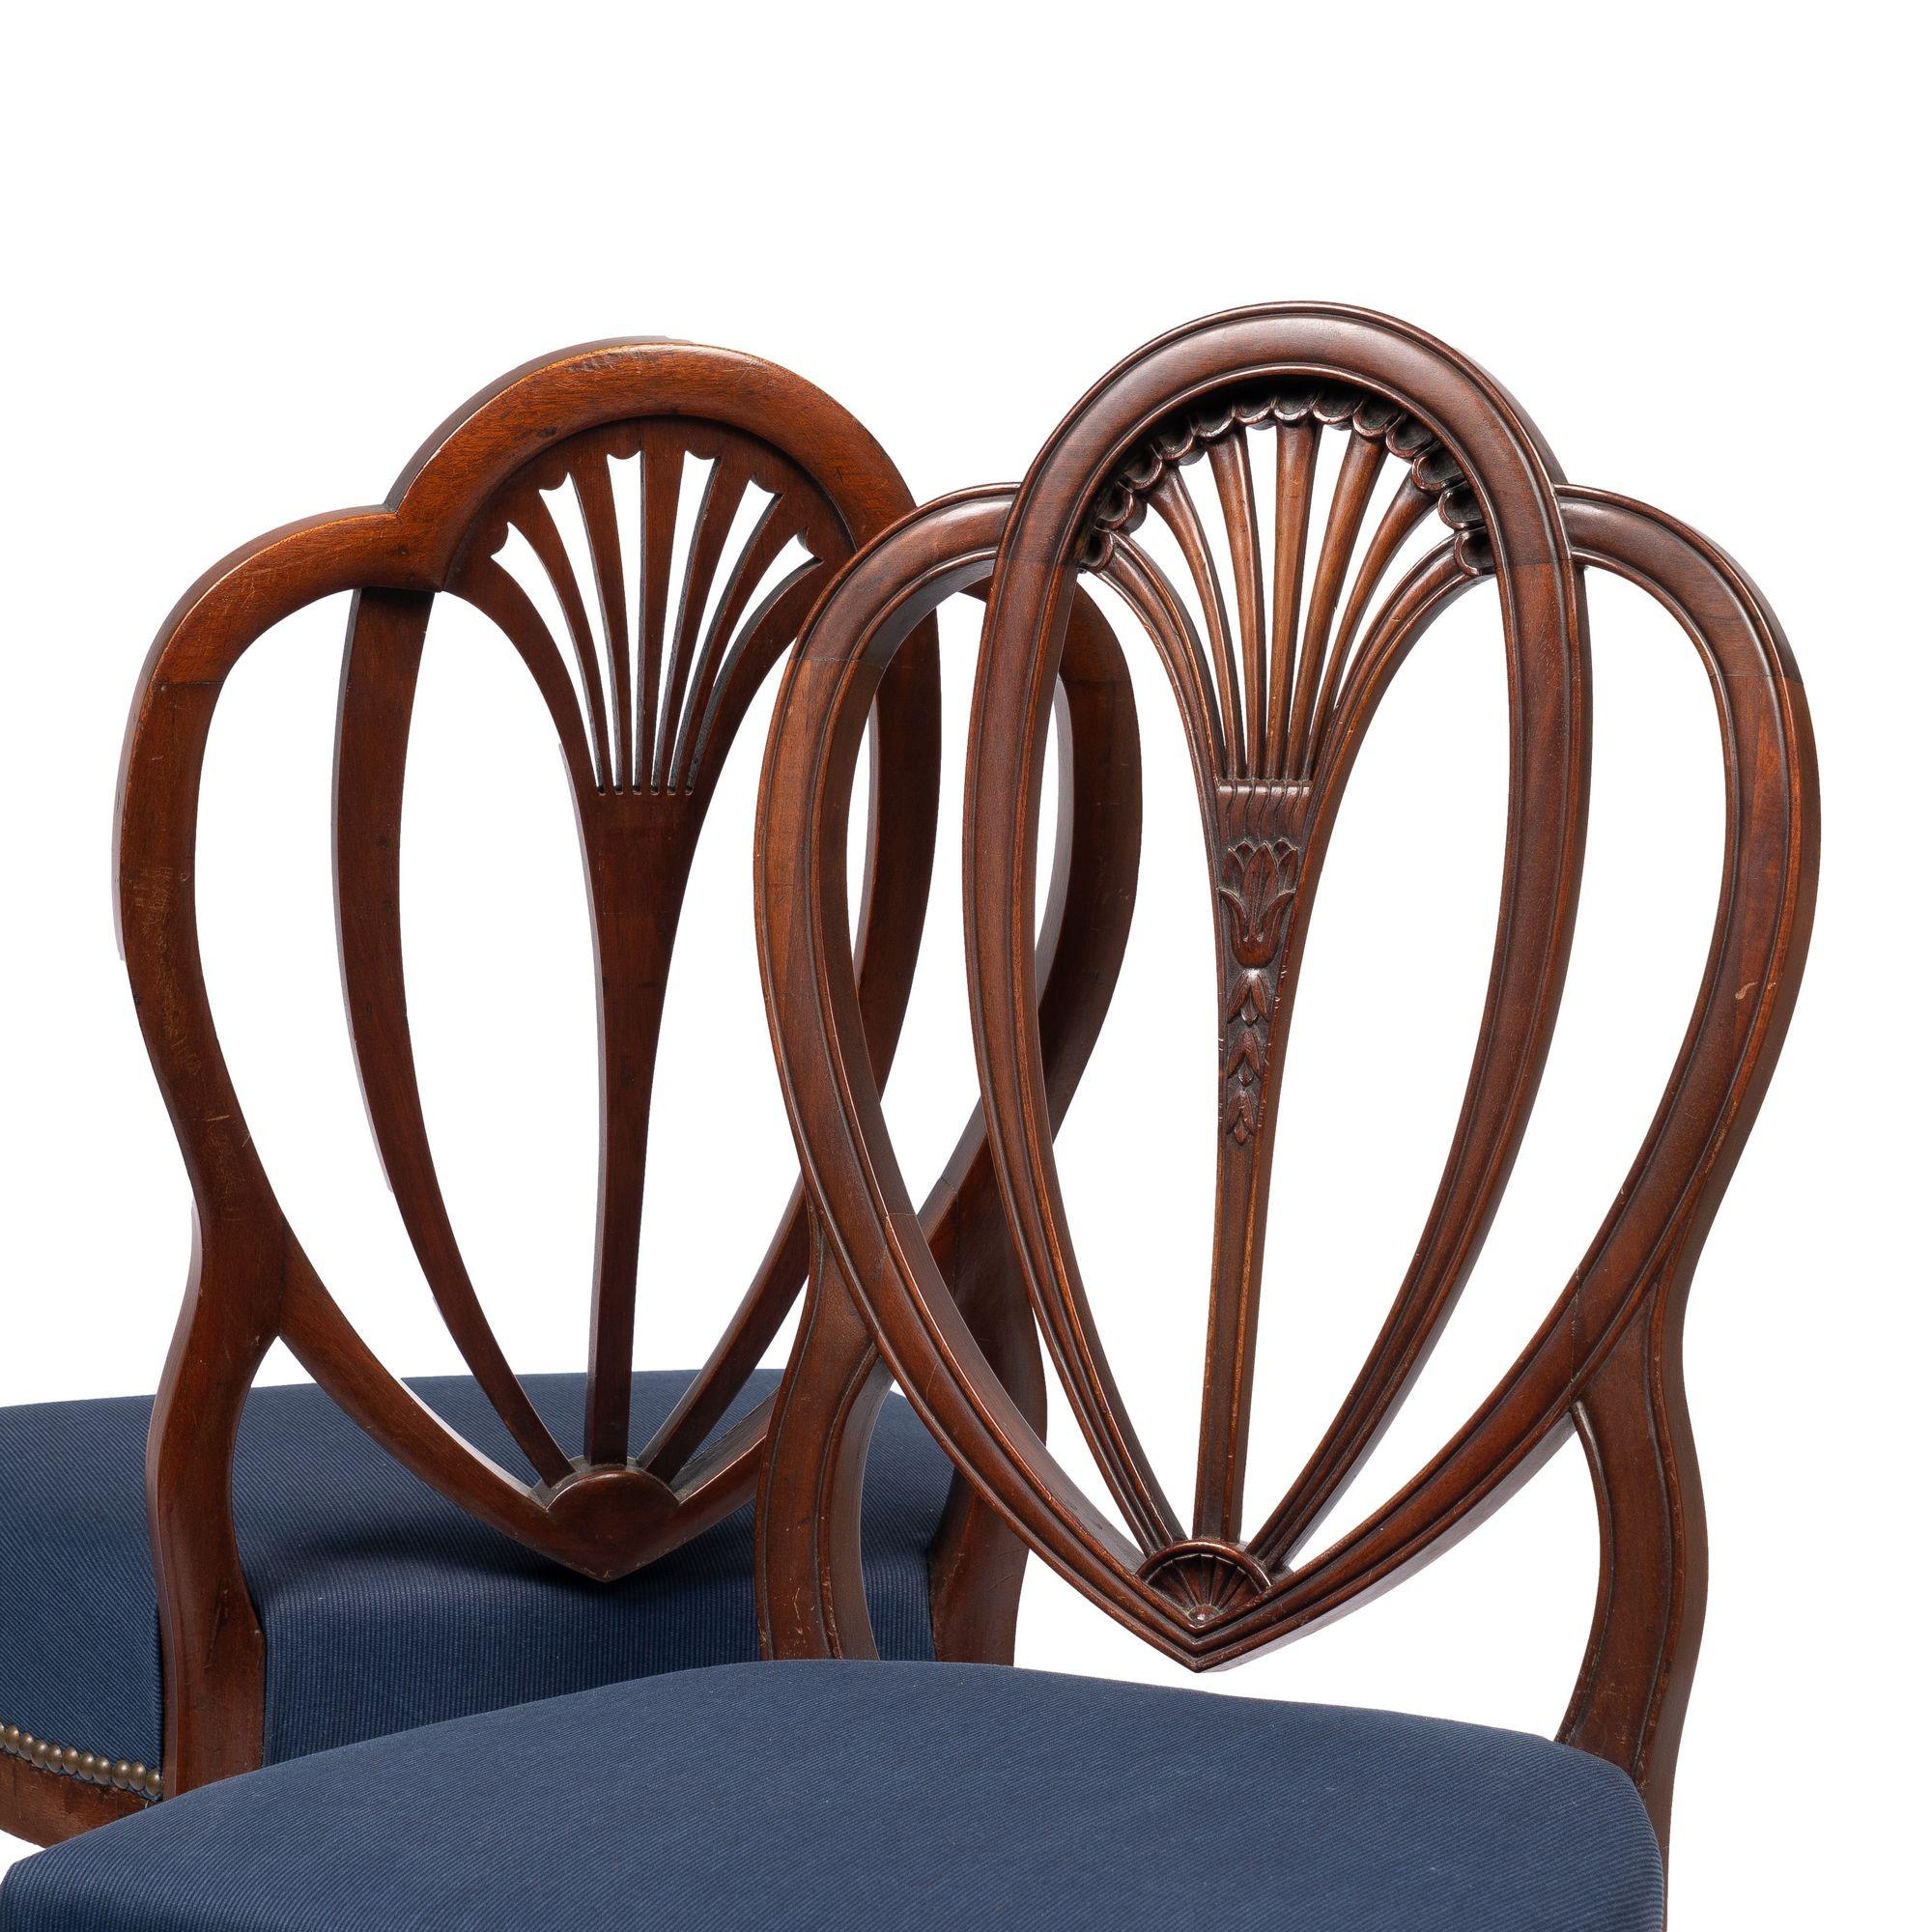 Pair of Academic Revival Federal Mahogany Heart Back Side Chairs, 1900-25 For Sale 6